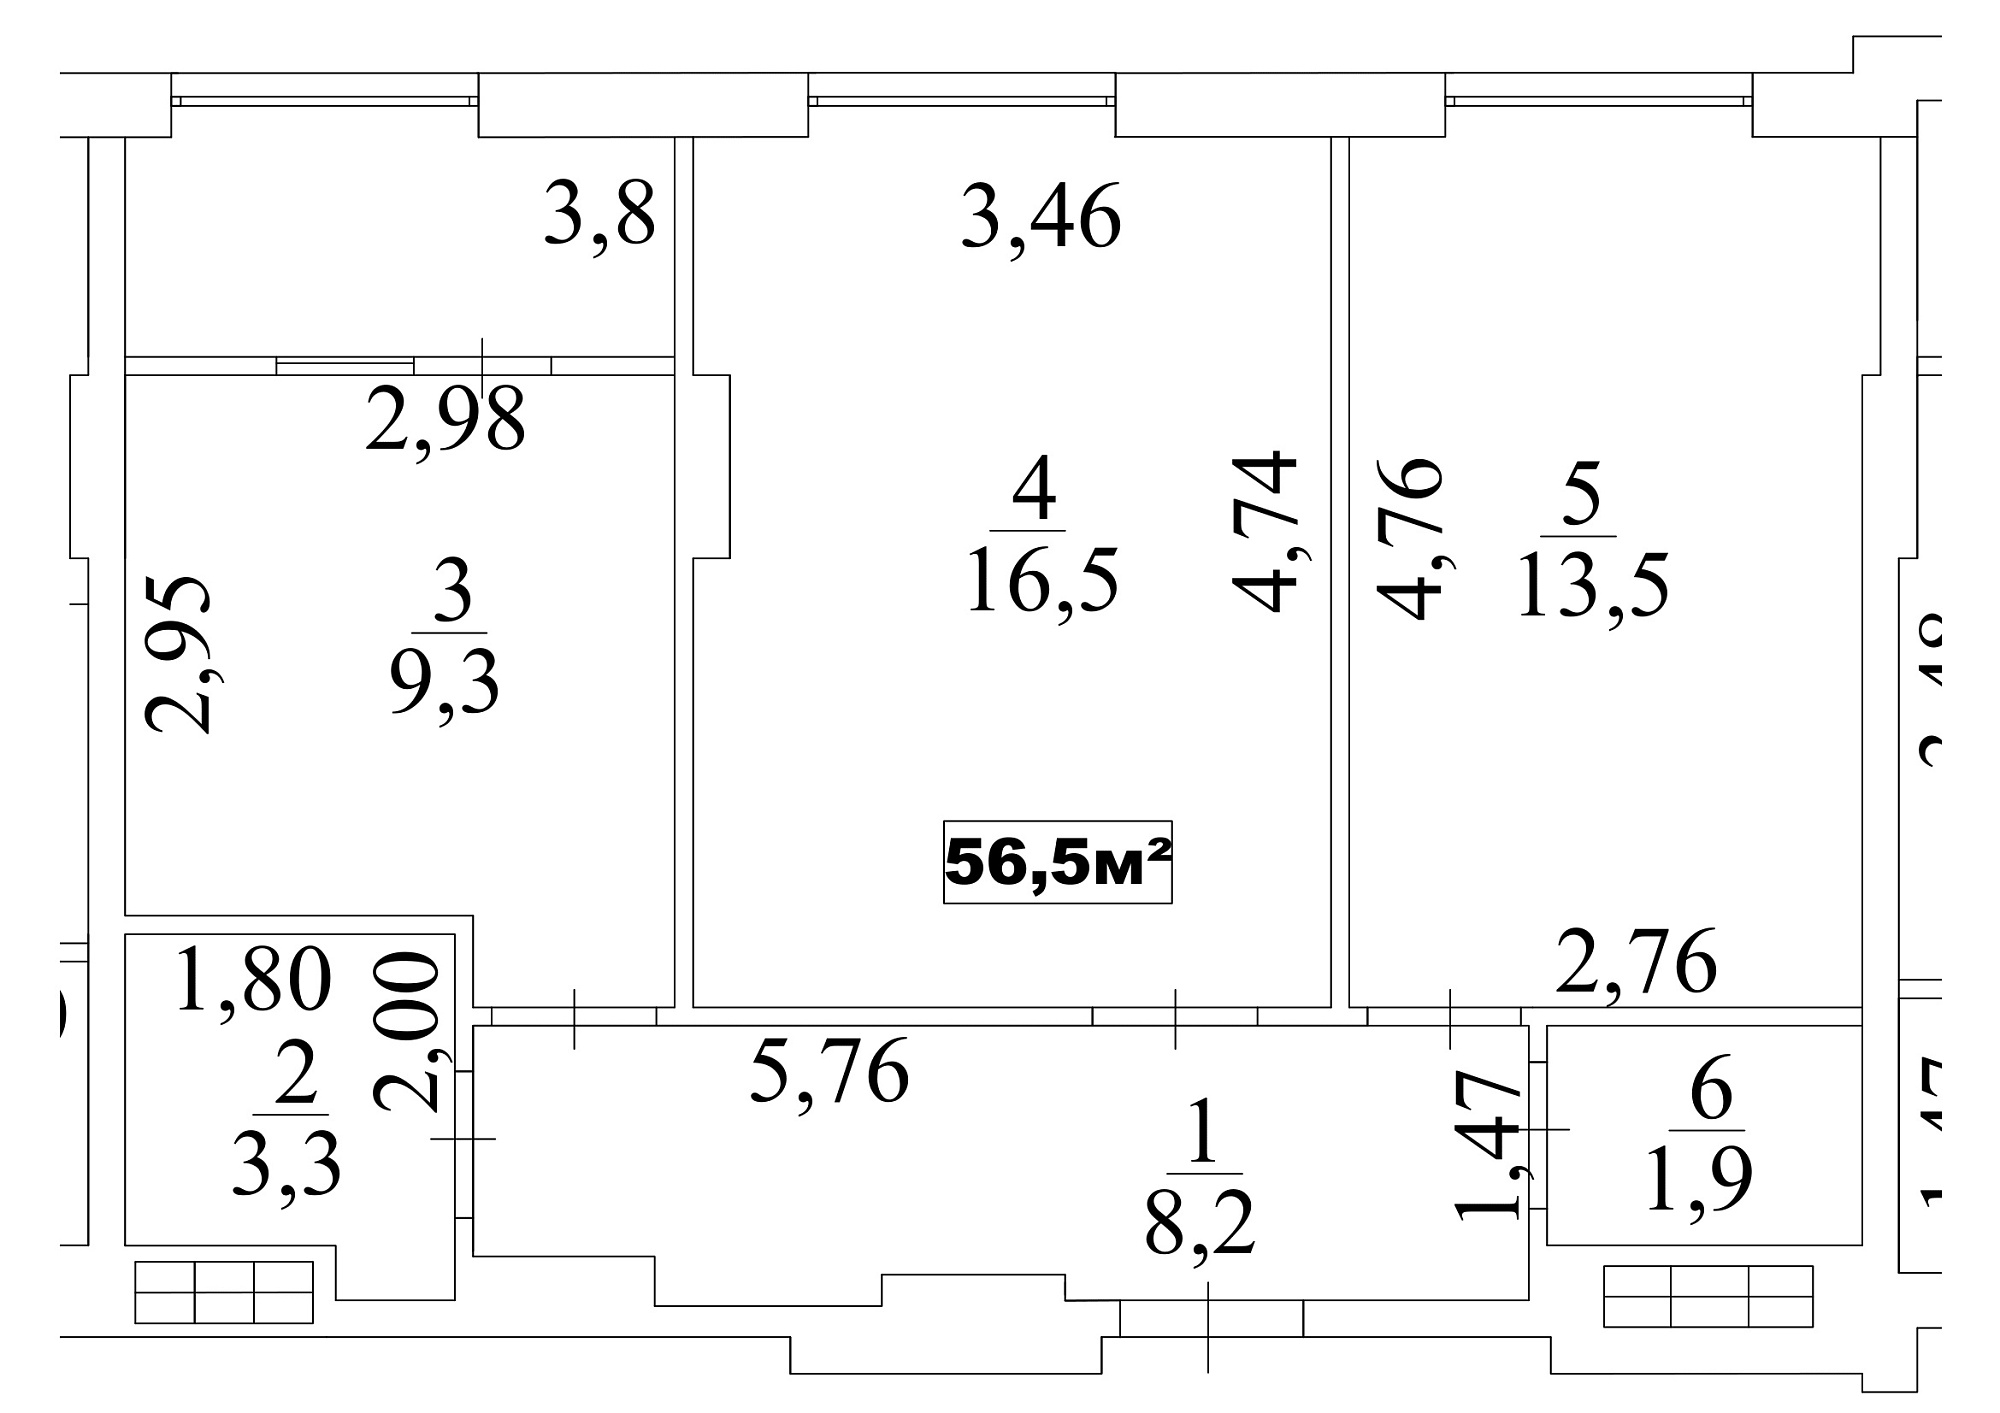 Planning 2-rm flats area 56.5m2, AB-10-08/00067.